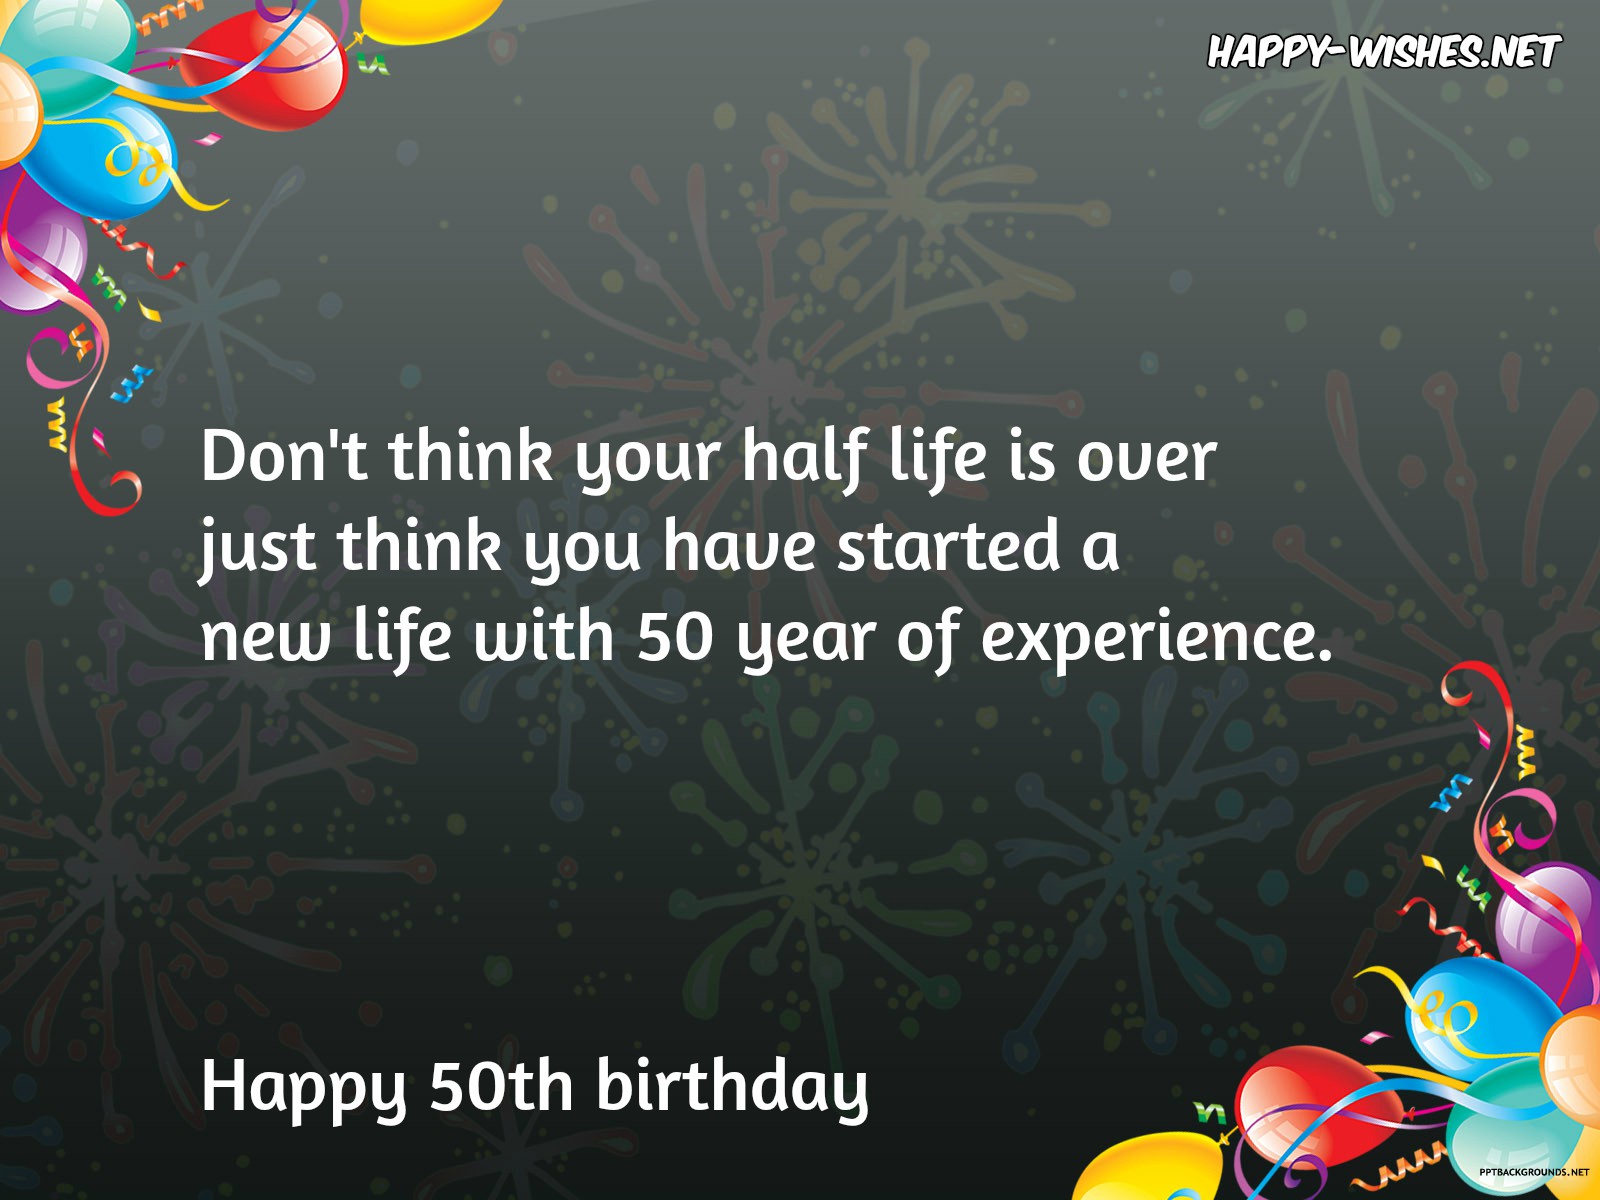 Happy 50th Birthday wishes - Quotes & images